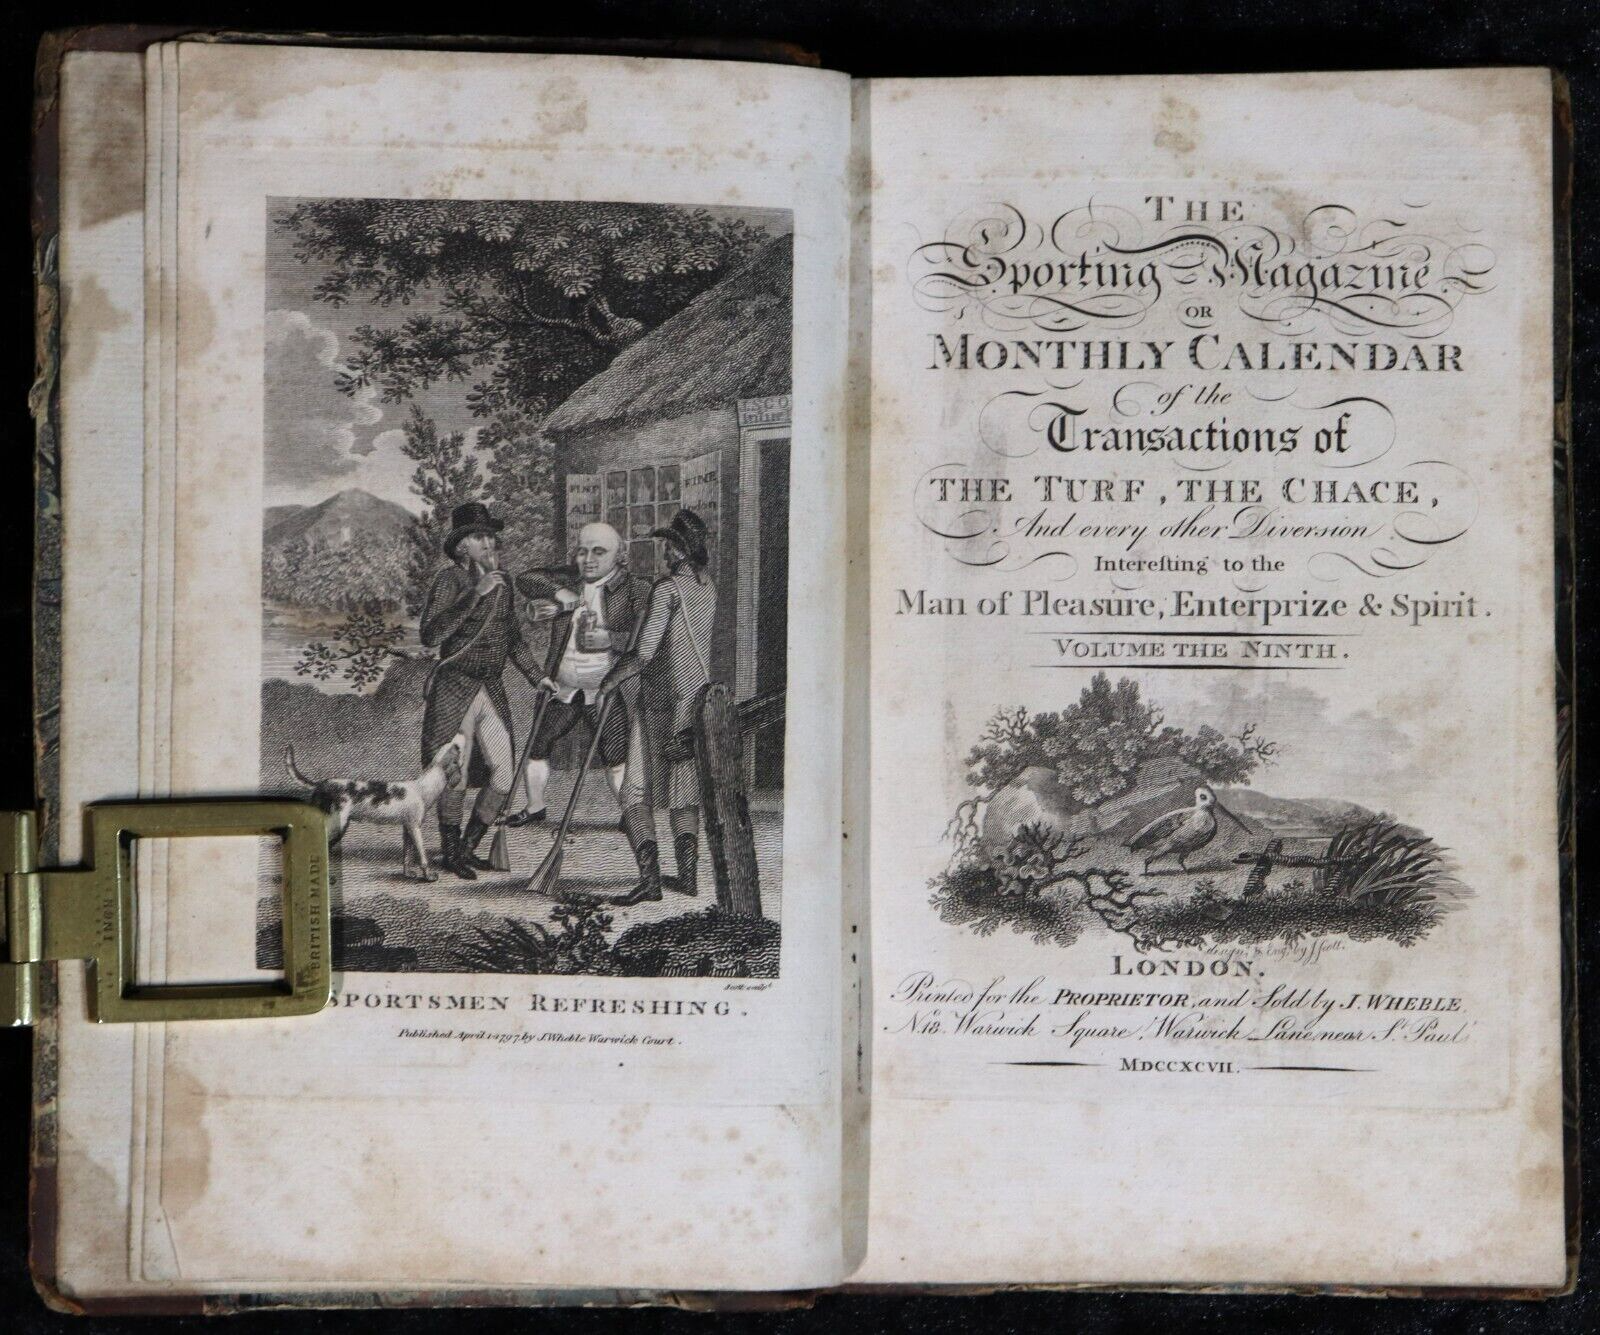 The Sporting Magazine: Monthly Calendar - 1797 - Antiquarian Sport History Book - 0